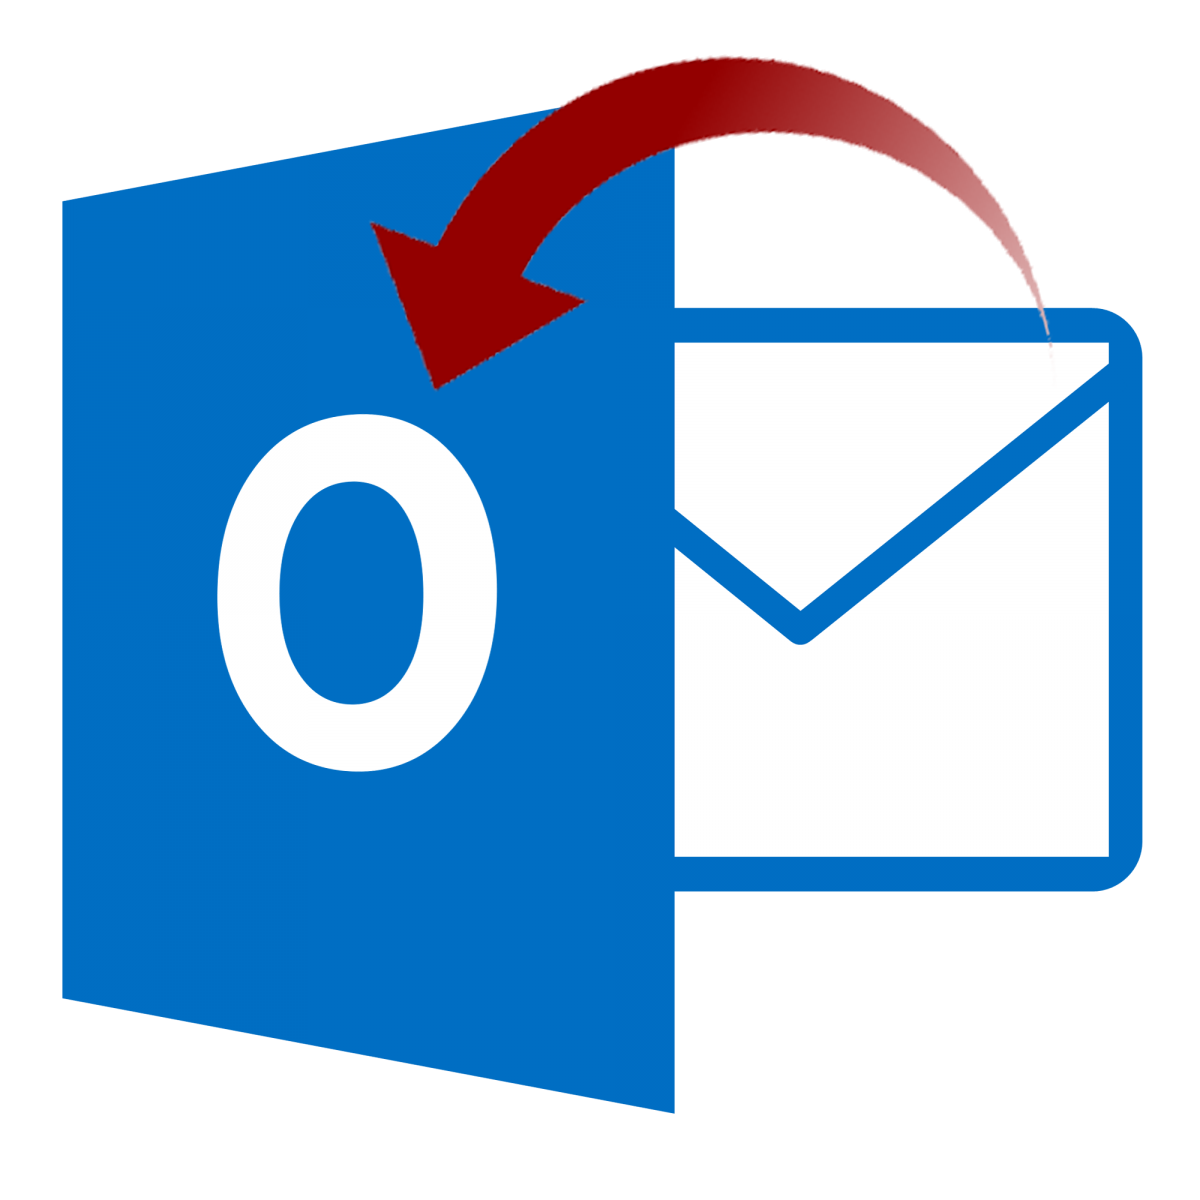 Outlook Office Outlook.Com Email 365 Microsoft PNG Image